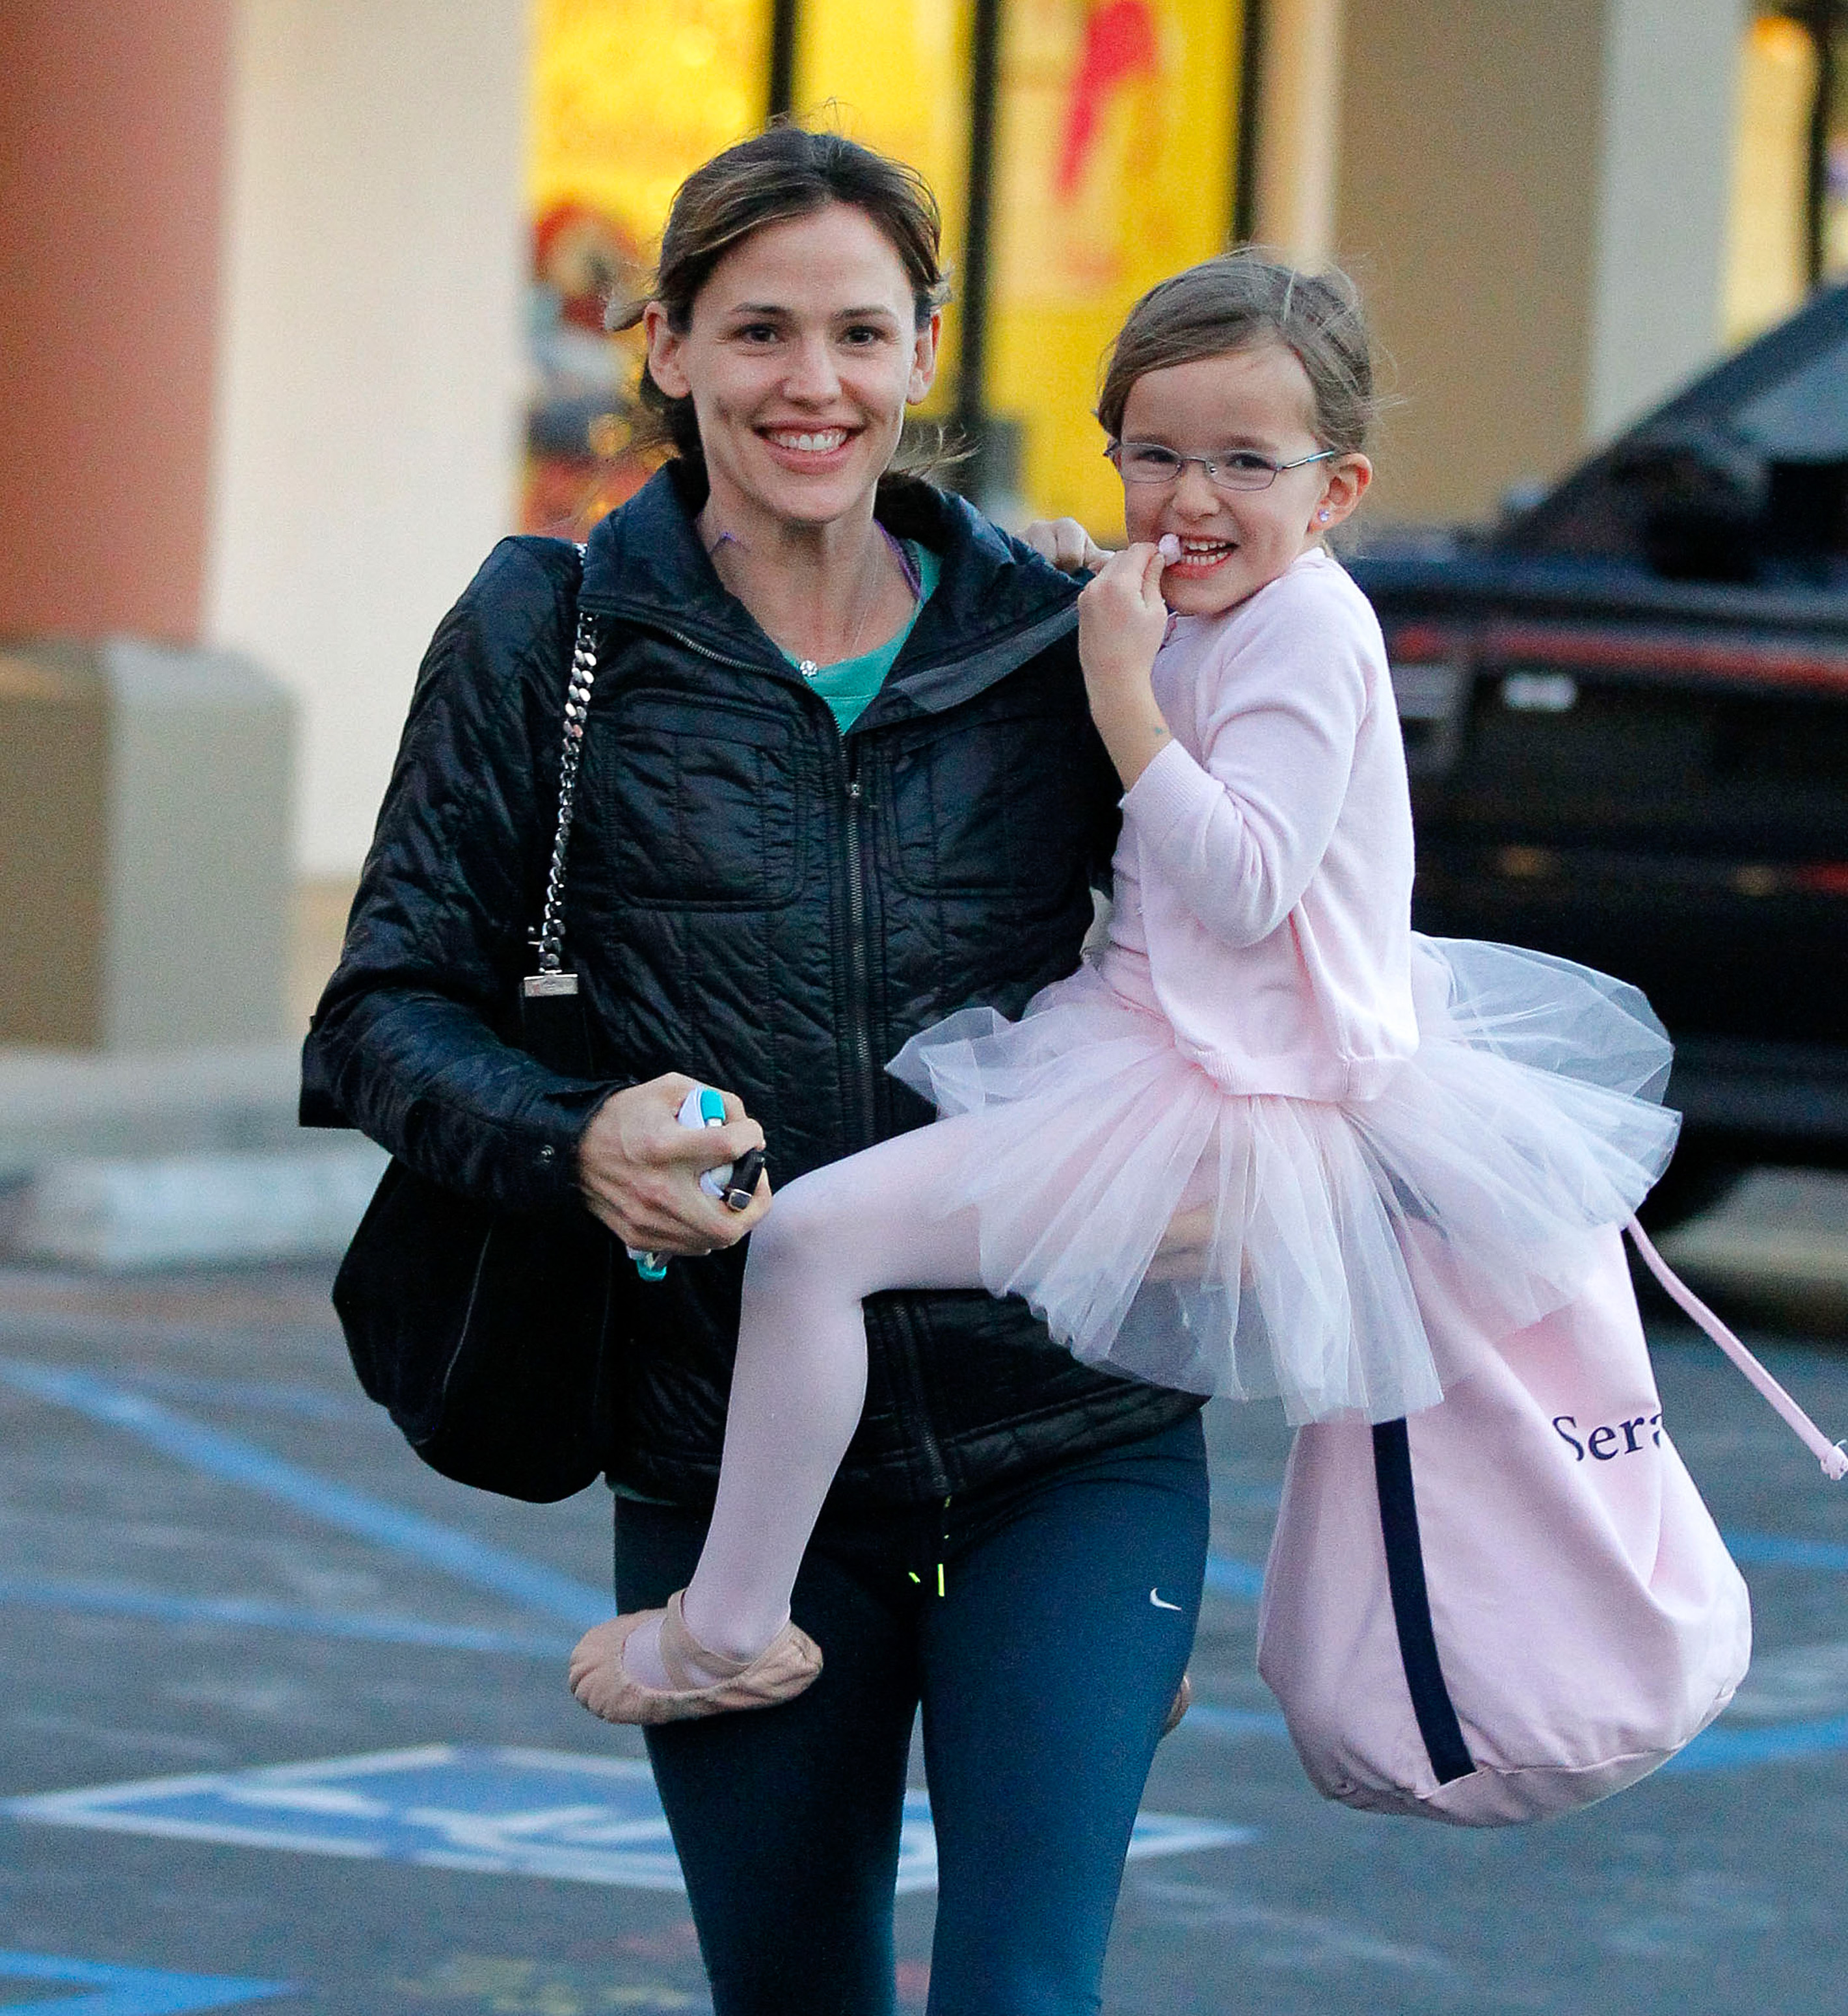 Jennifer Garner and Seraphina Affleck on December 13, 2013 in Los Angeles, California. | Source: Getty Images